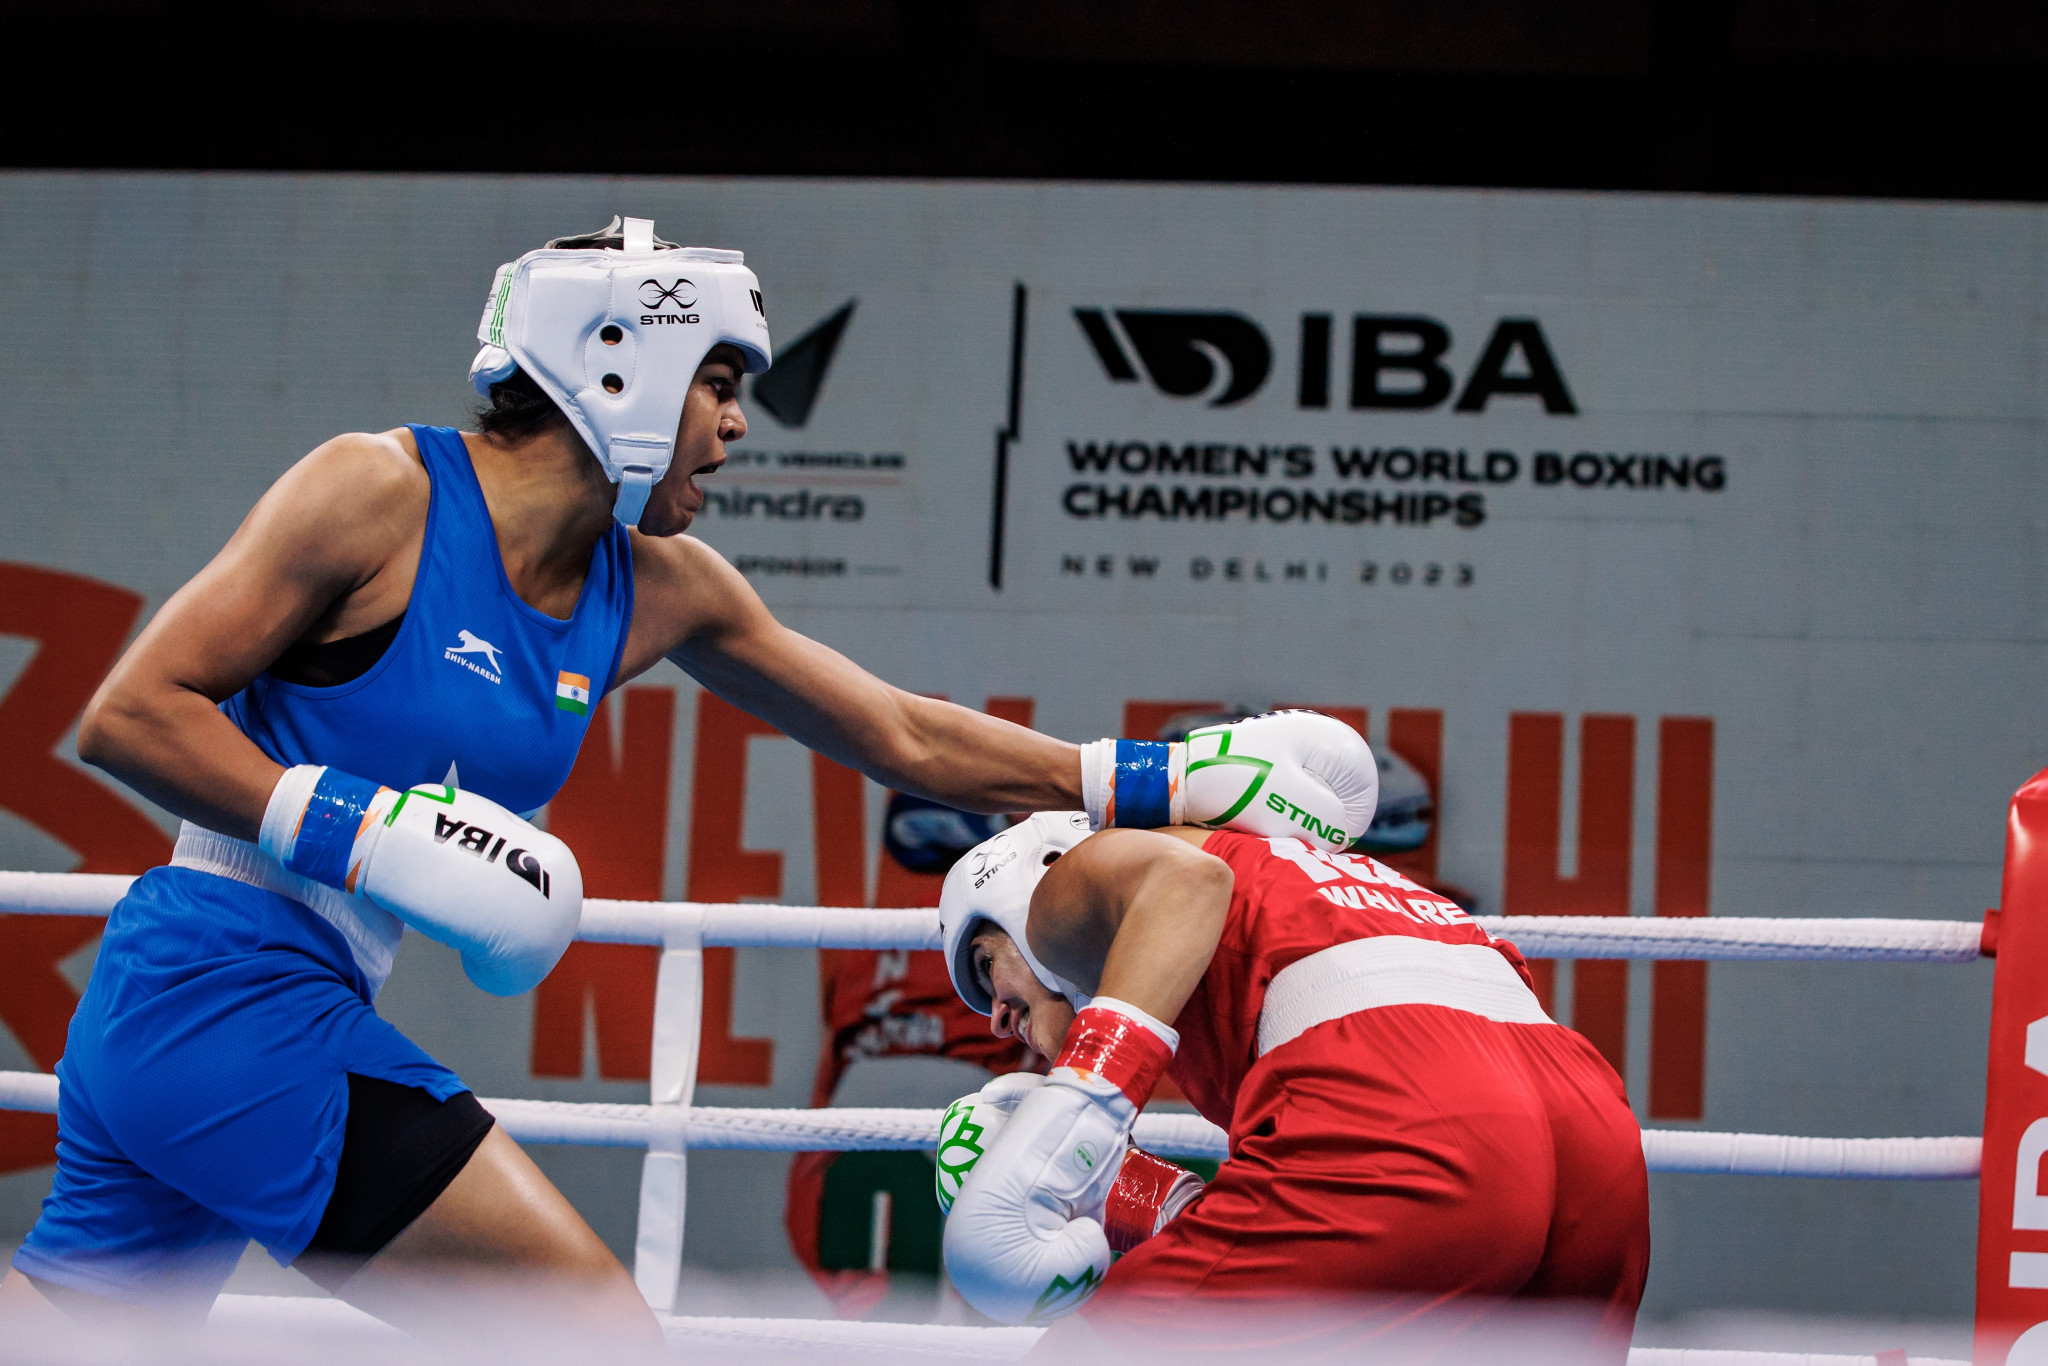 New Zealand’s Cara Wharerau, right, does her best to avoid a punch from Manju of India ©IBA